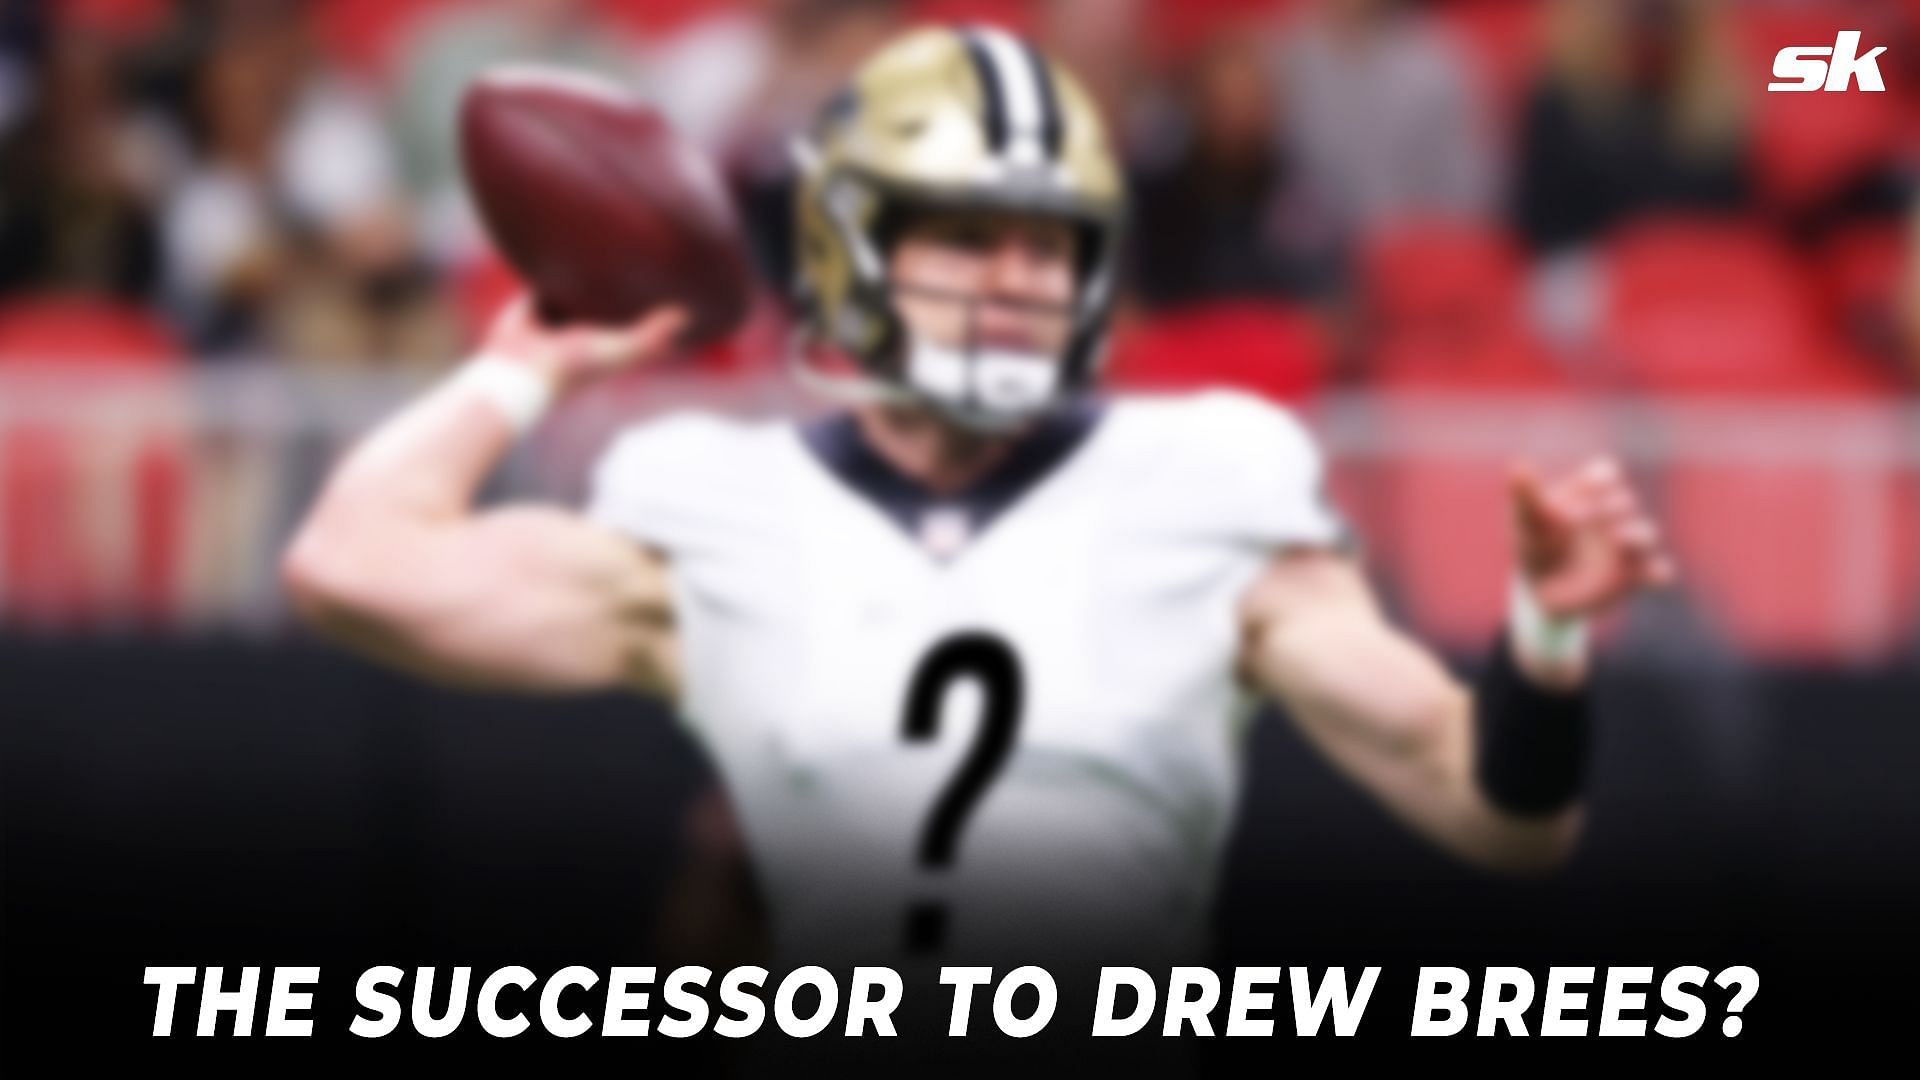 What quaterback will succeed Drew Brees?